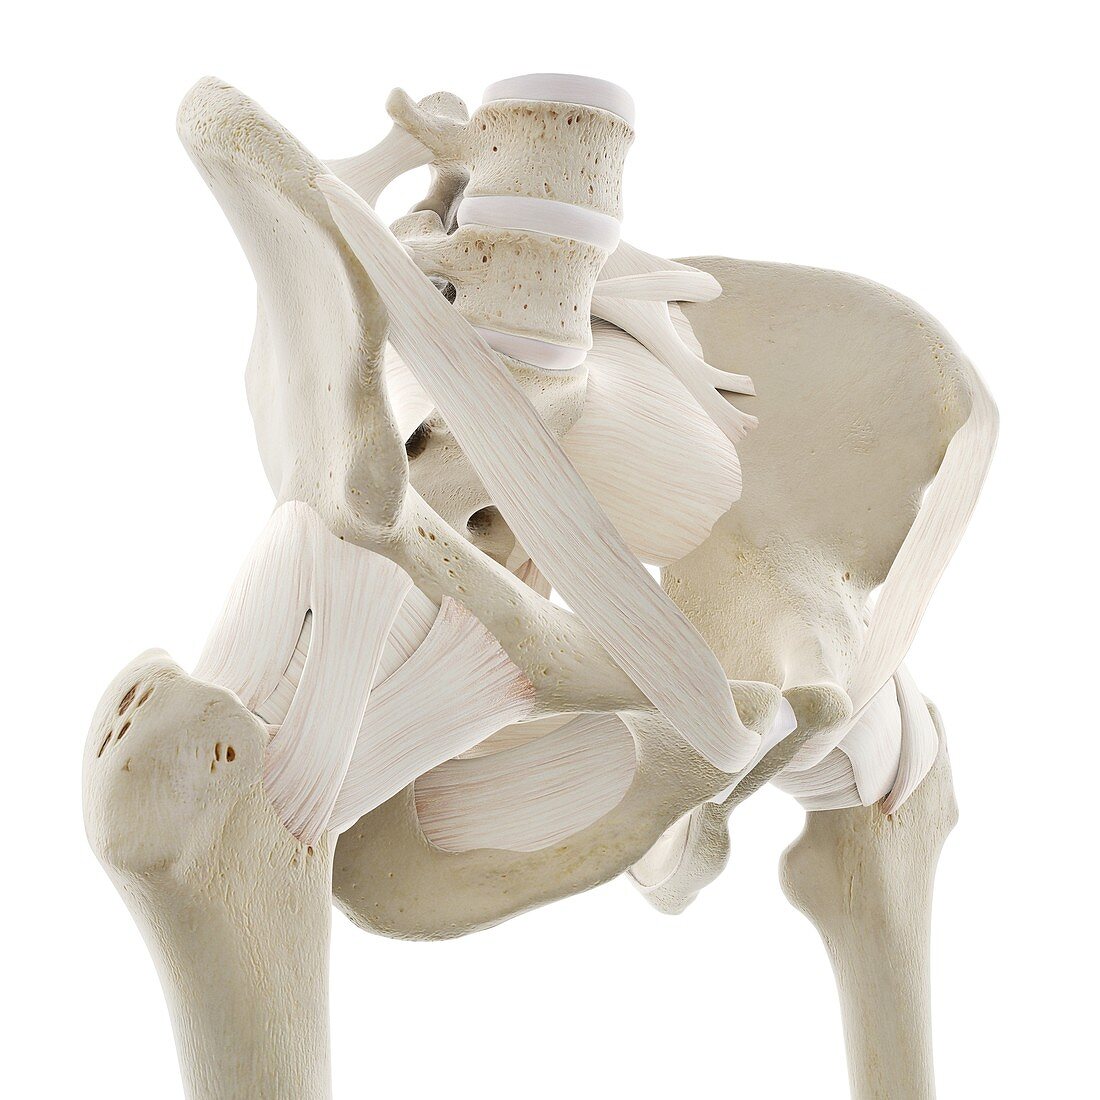 Ligaments of the hip, illustration